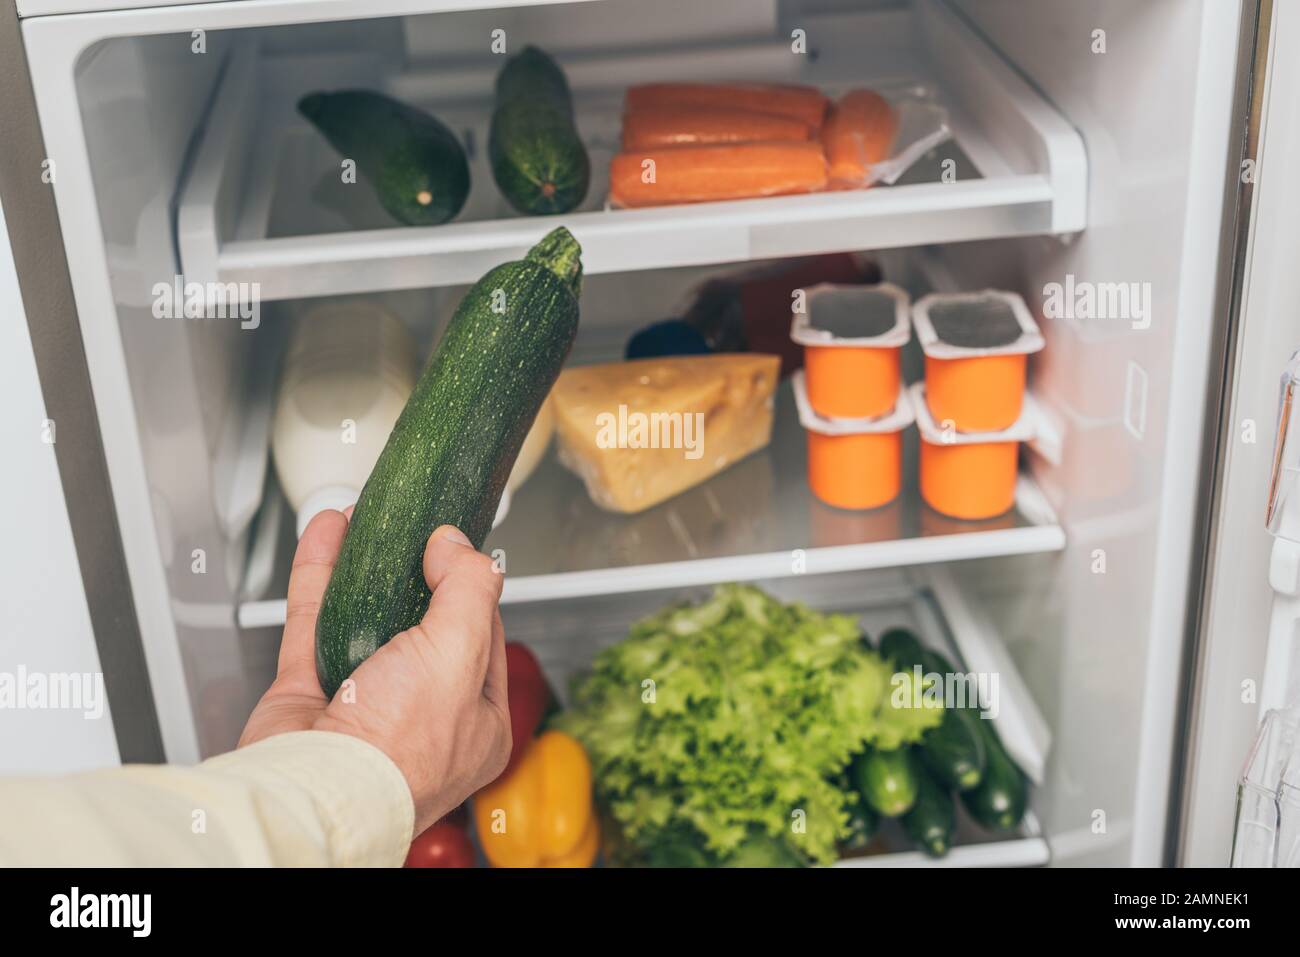 cropped view of man holding cucumber near open fridge full of food Stock Photo